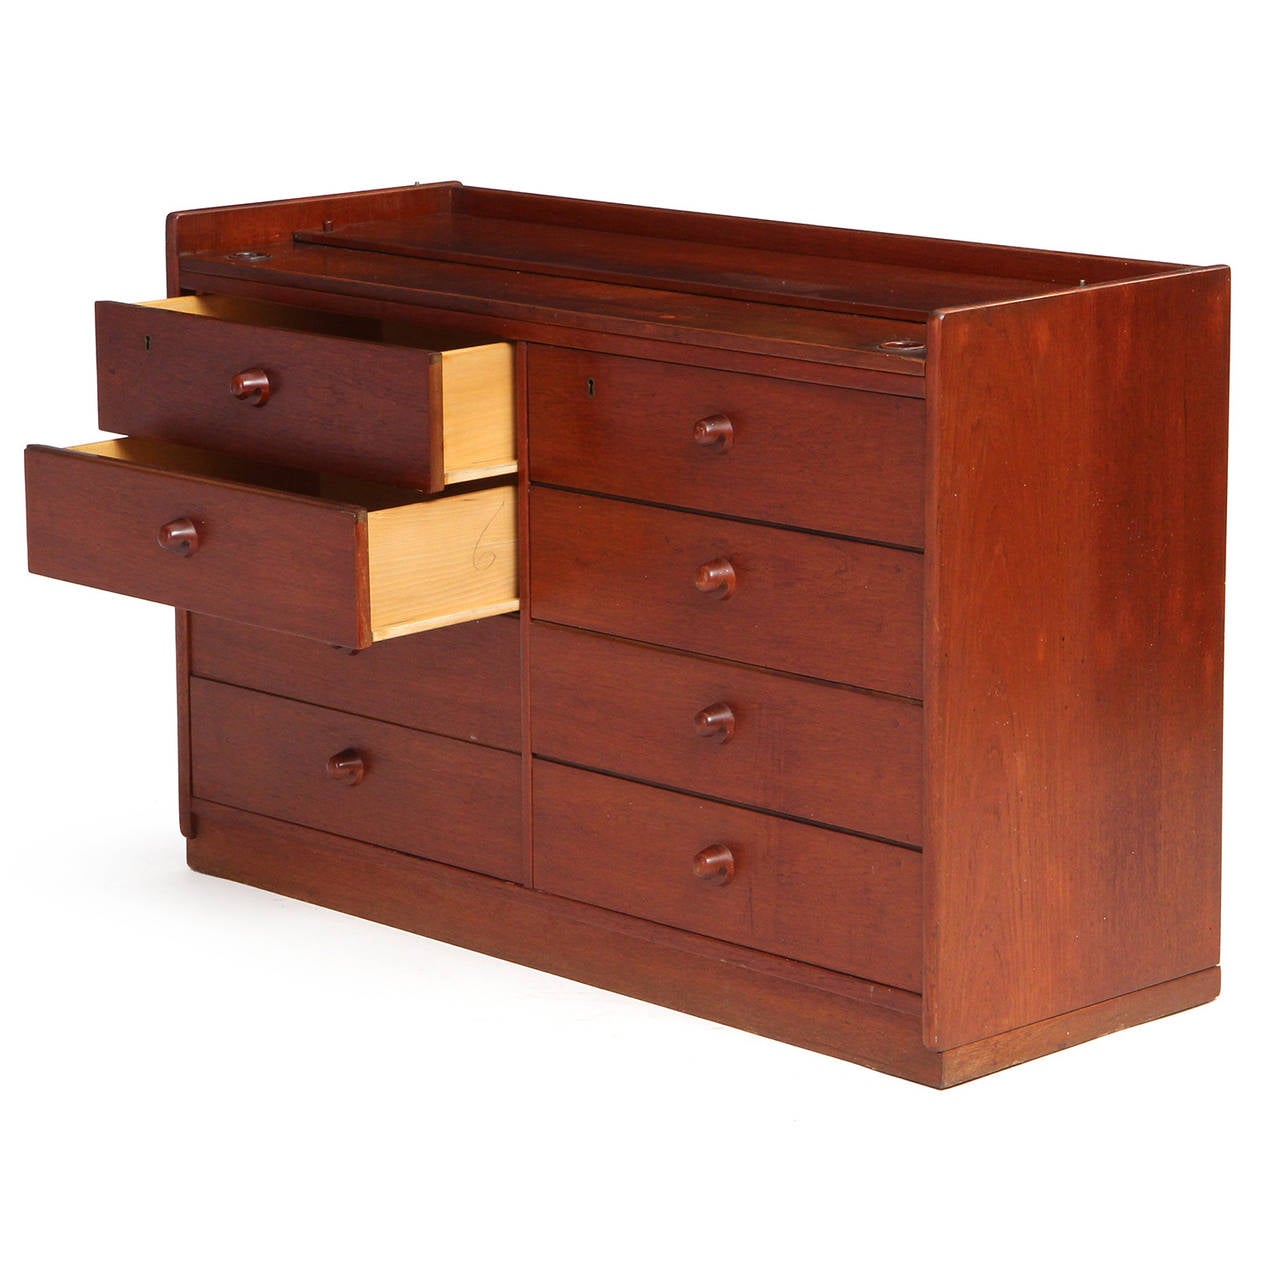 Danish Cabinet with Drawers by Ejner Larsen and Aksel Bender Madsen For Sale